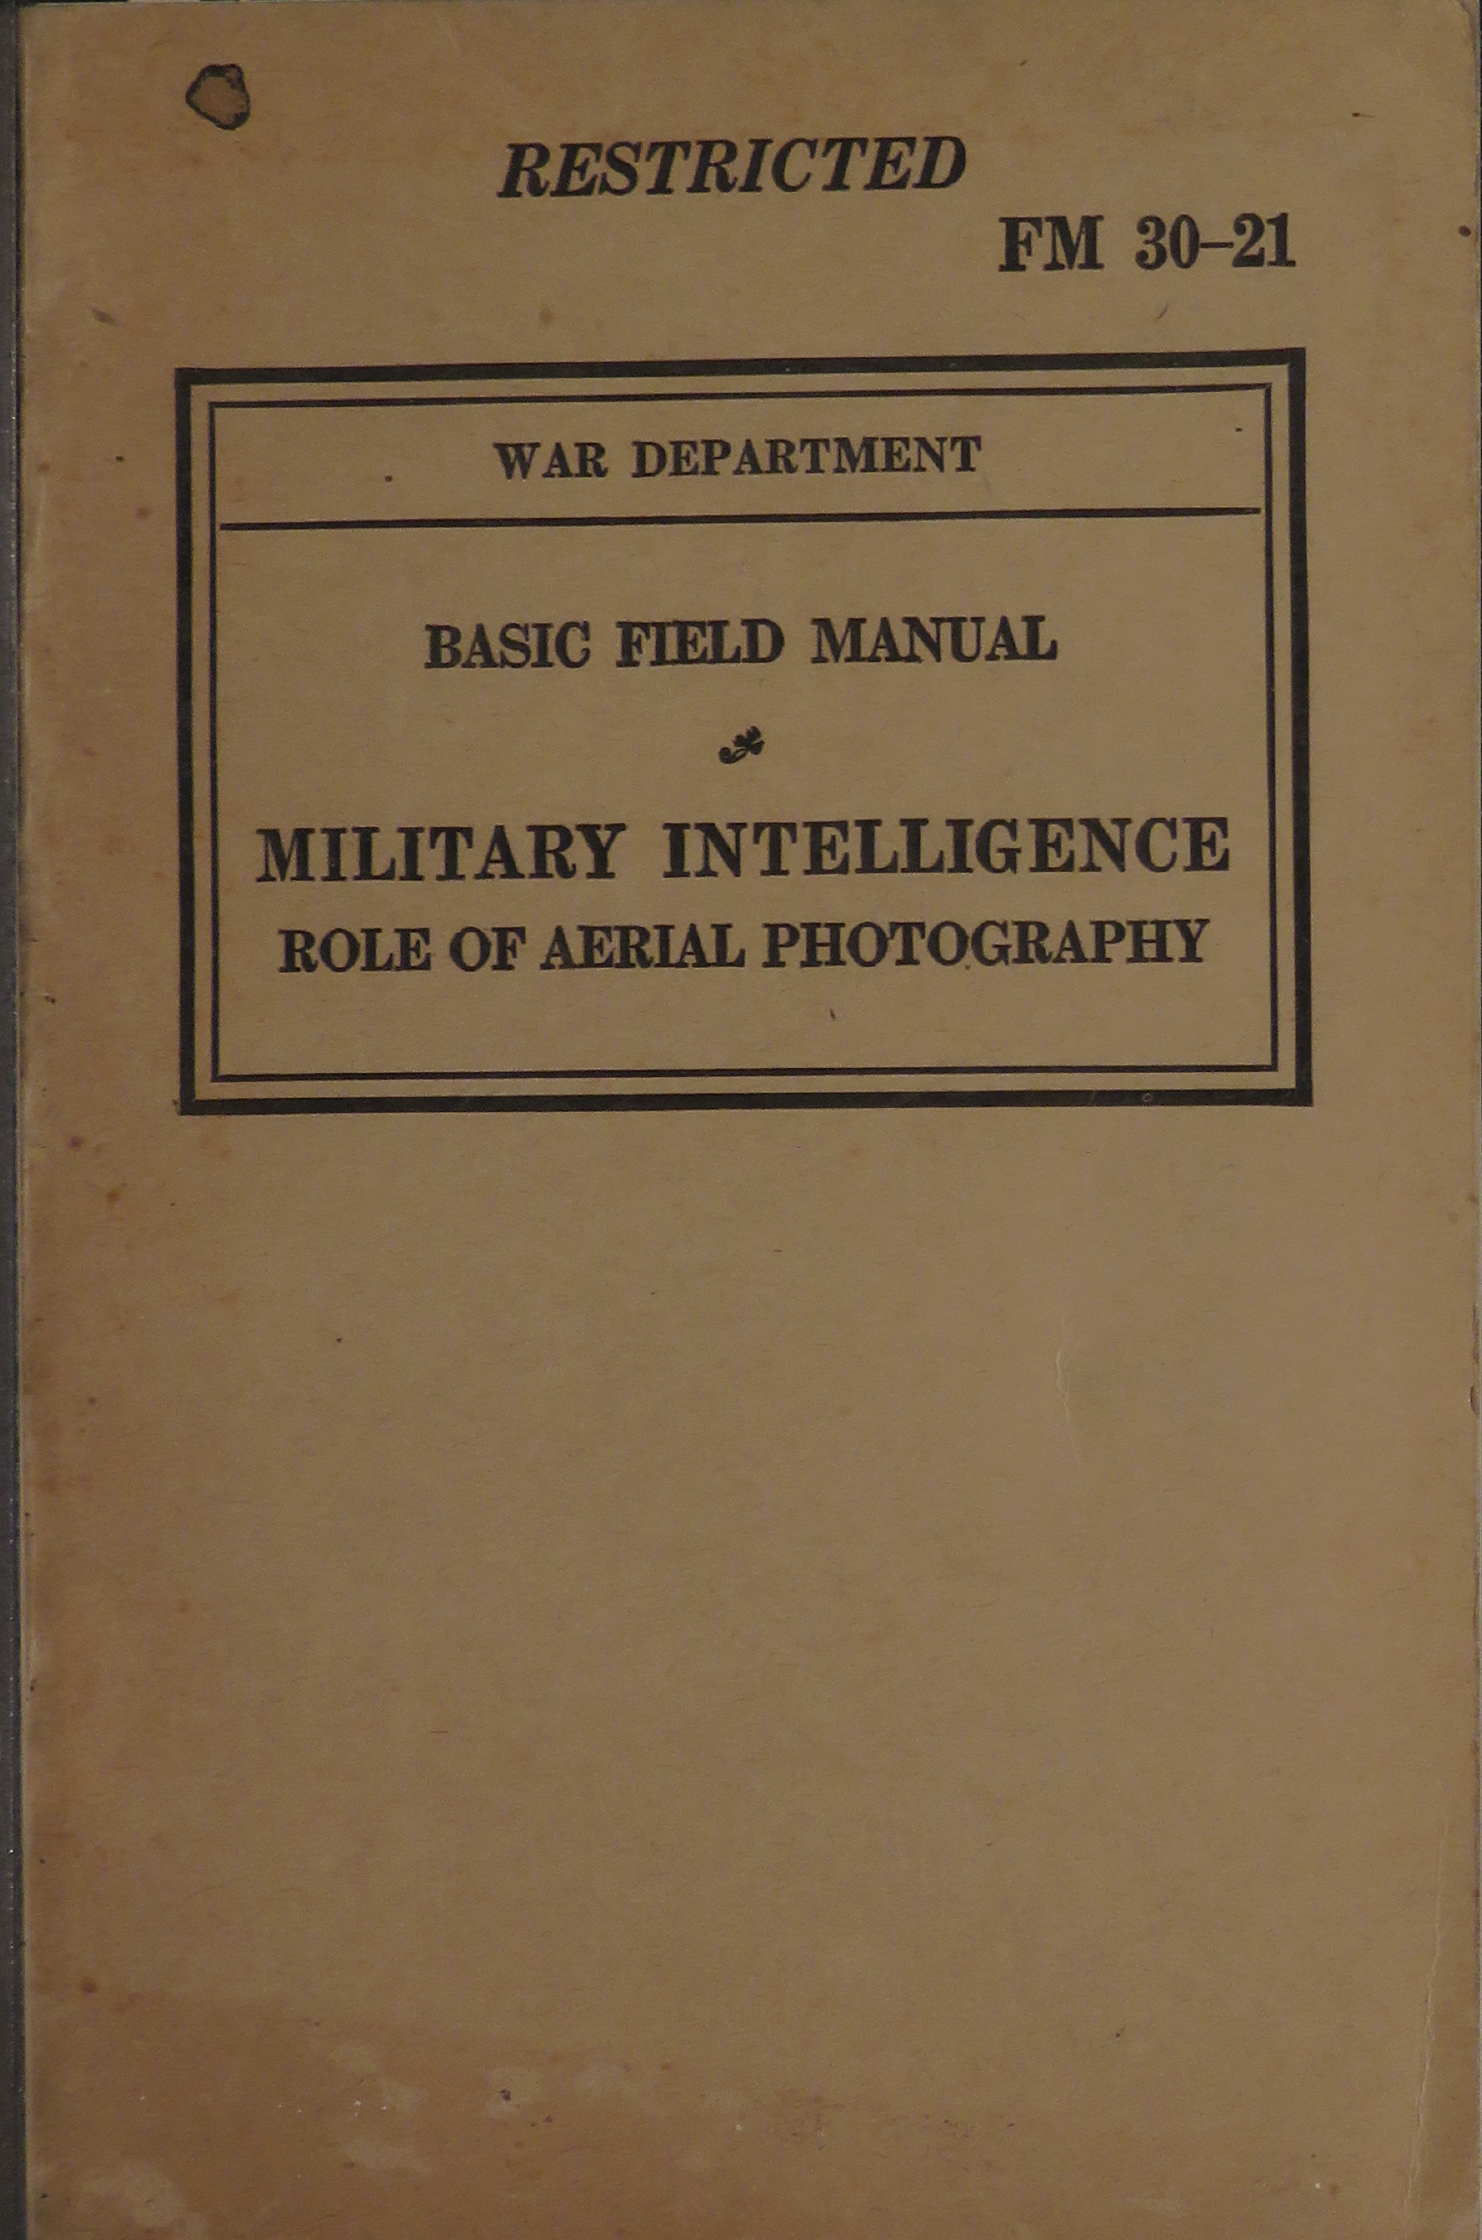 Sample page 1 from AirCorps Library document: Basic Field Manual for Military Intelligence Role of Aerial Photography